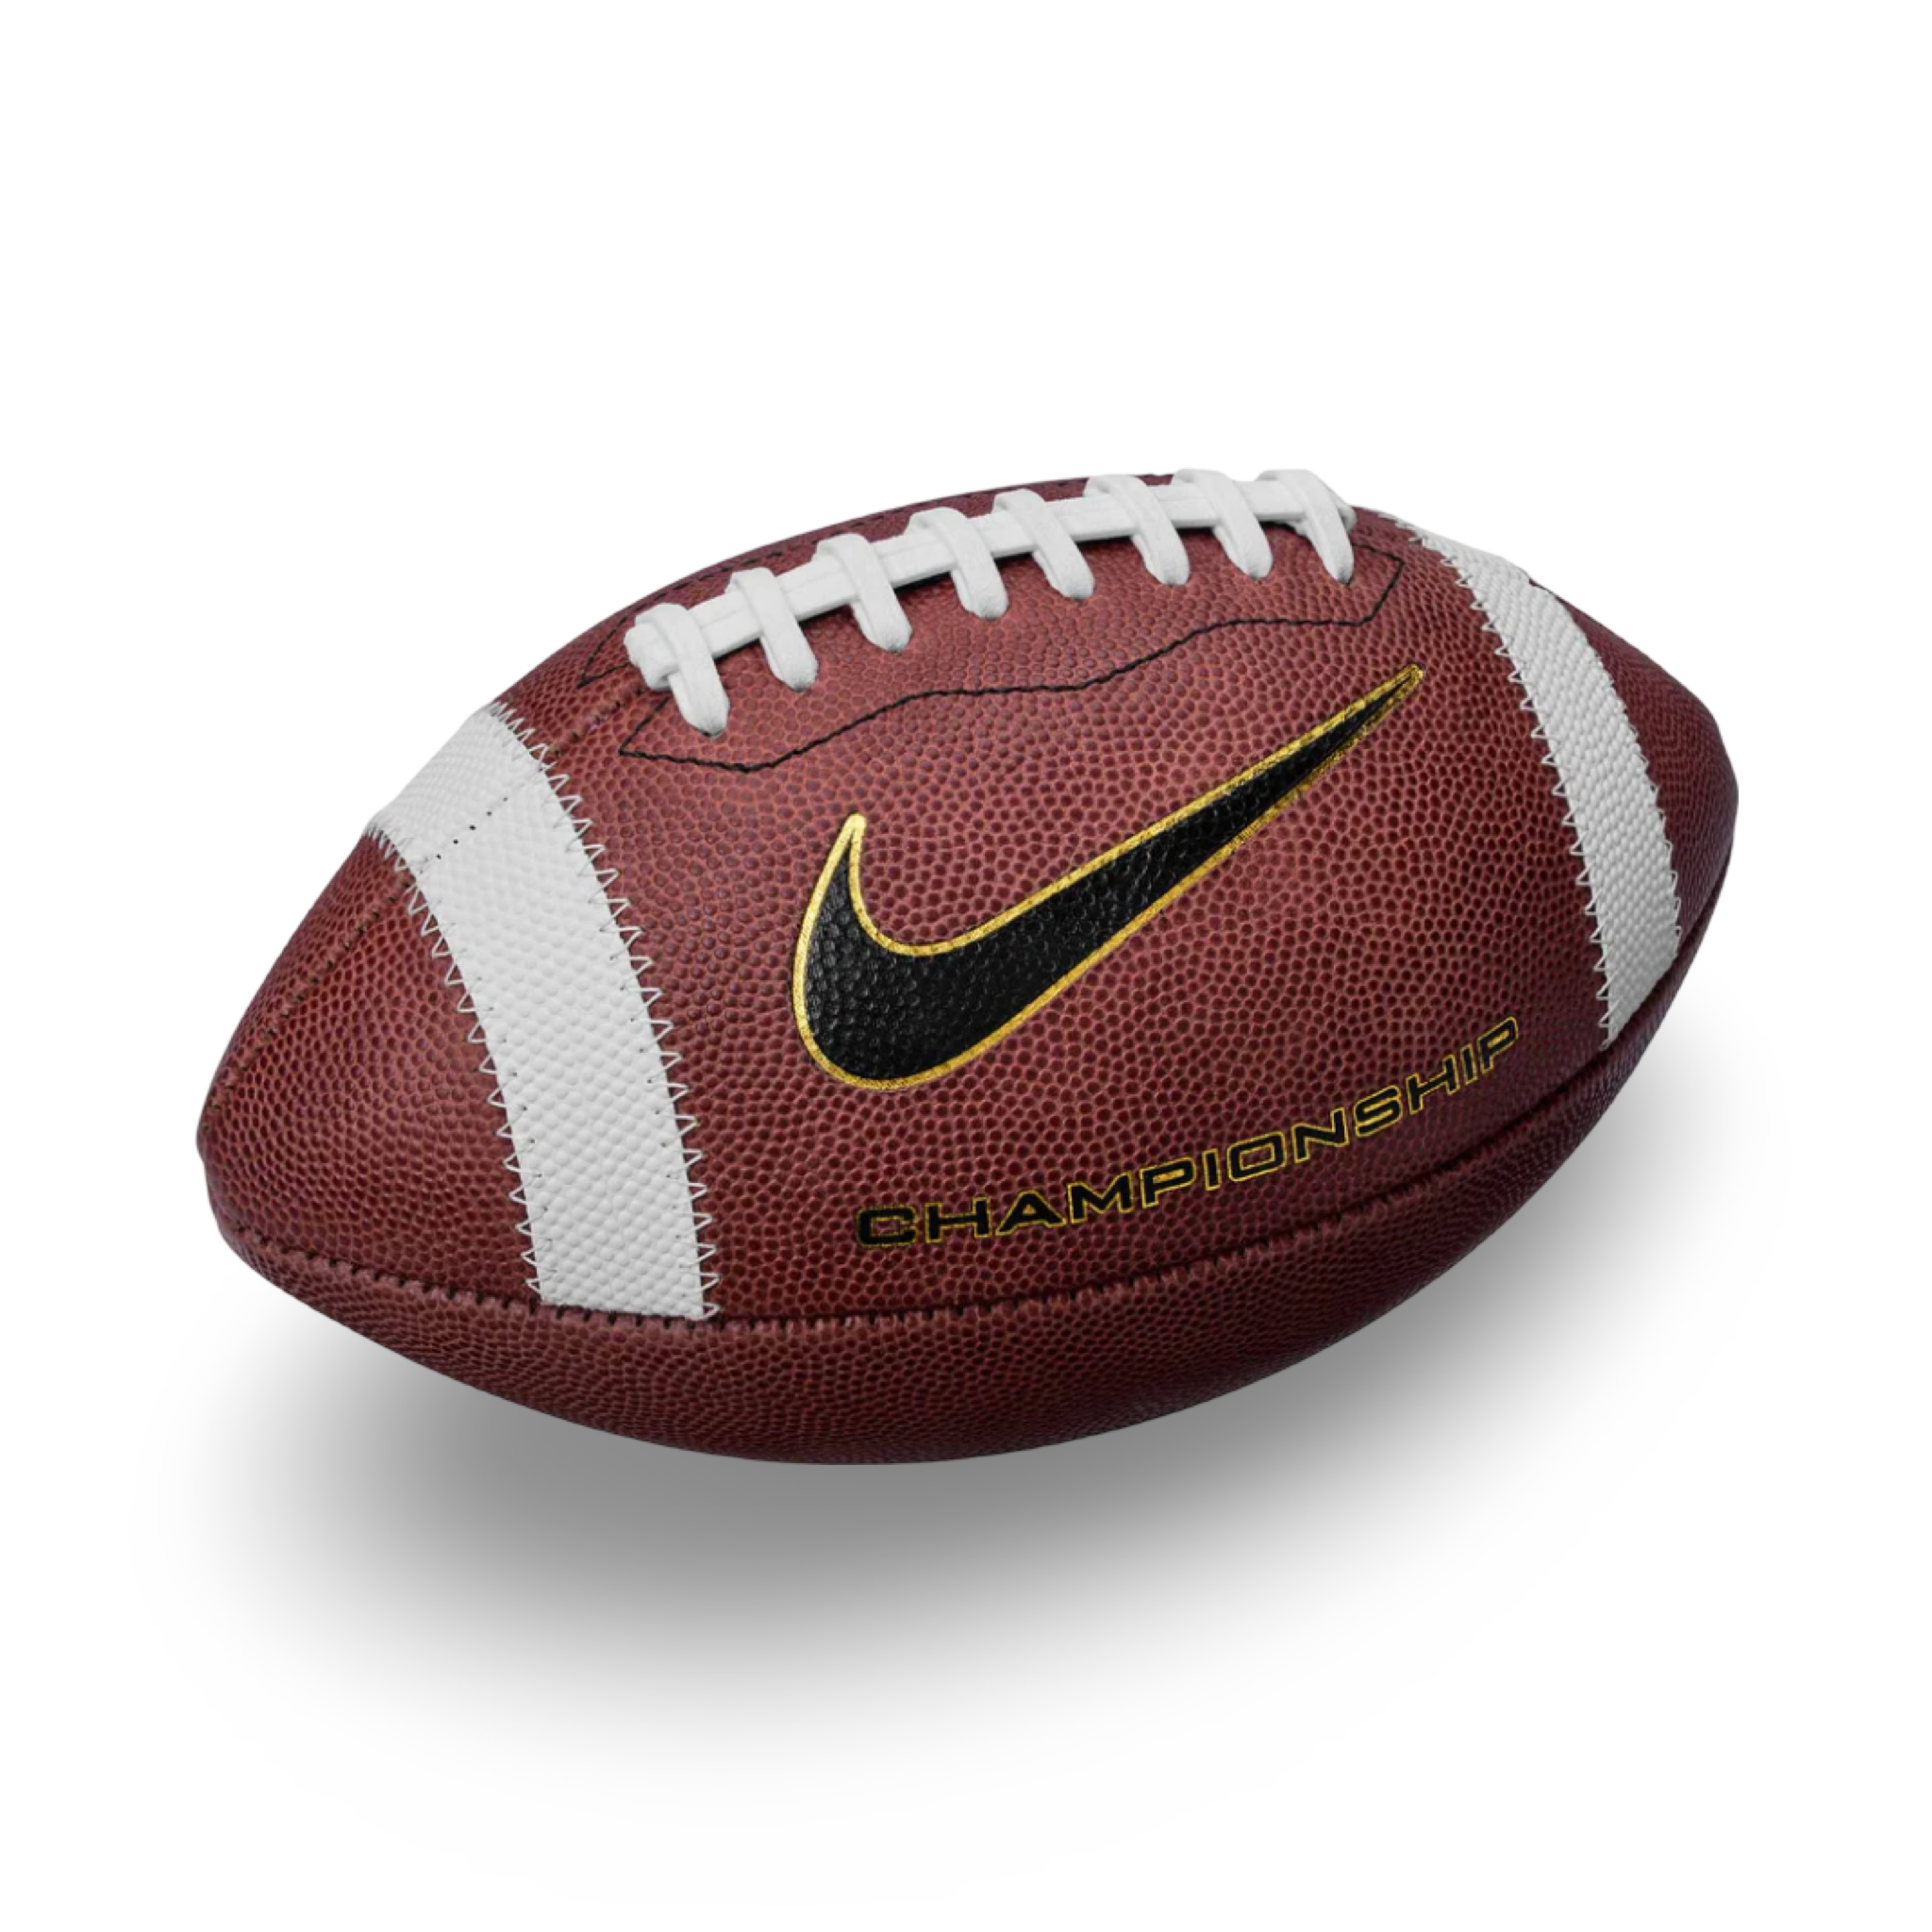 Nike Championship Leather Football - Official